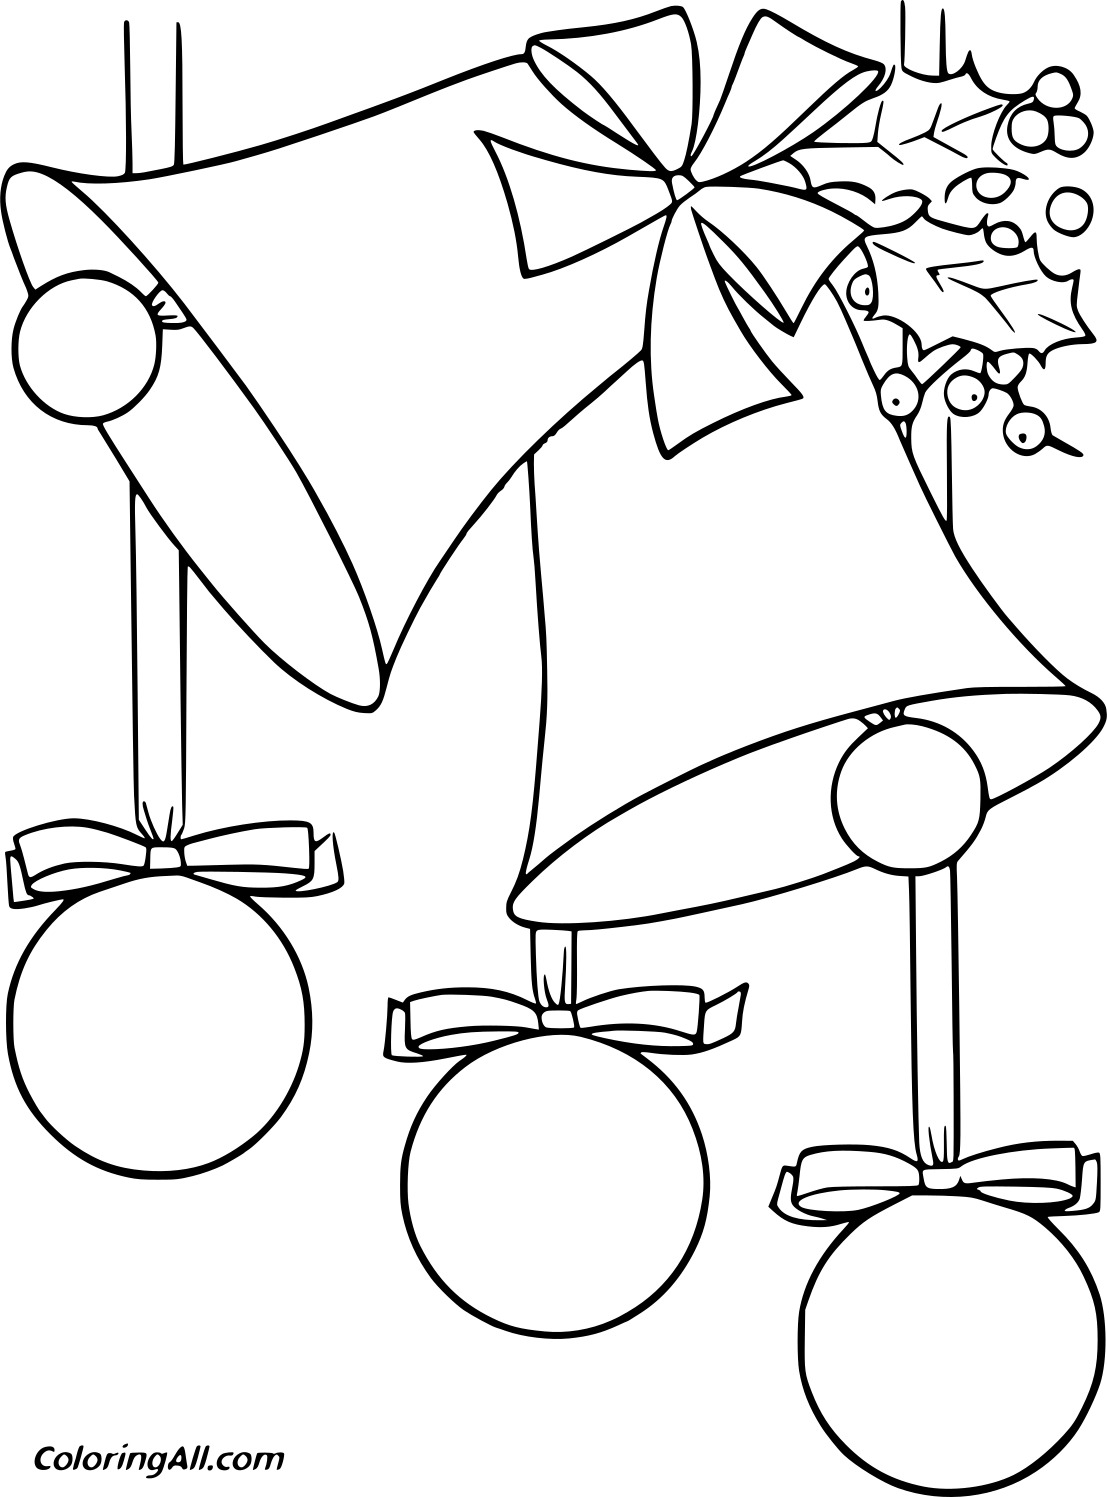 Five Blank Bells For Kids Coloring Page